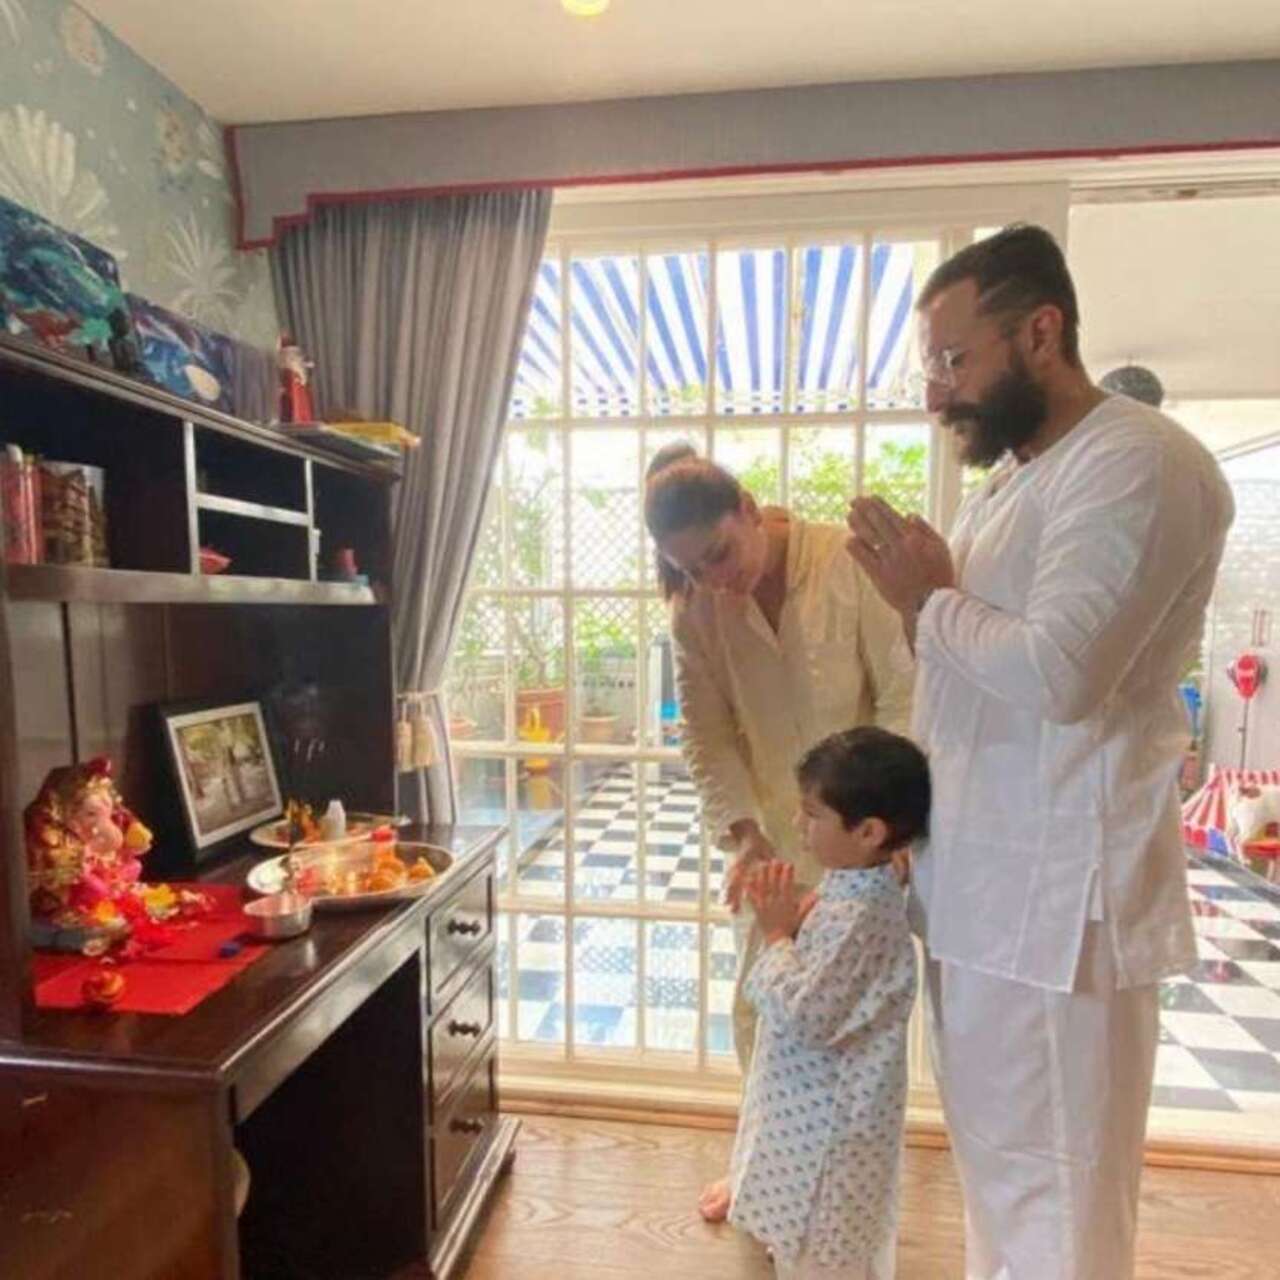 The Kapoors were known for hosting one of the biggest Ganesh Chaturthi celebrations at RK Studios. The future generation has taken the legacy forward. Kareena Kapoor celebrates the festival at home with her children